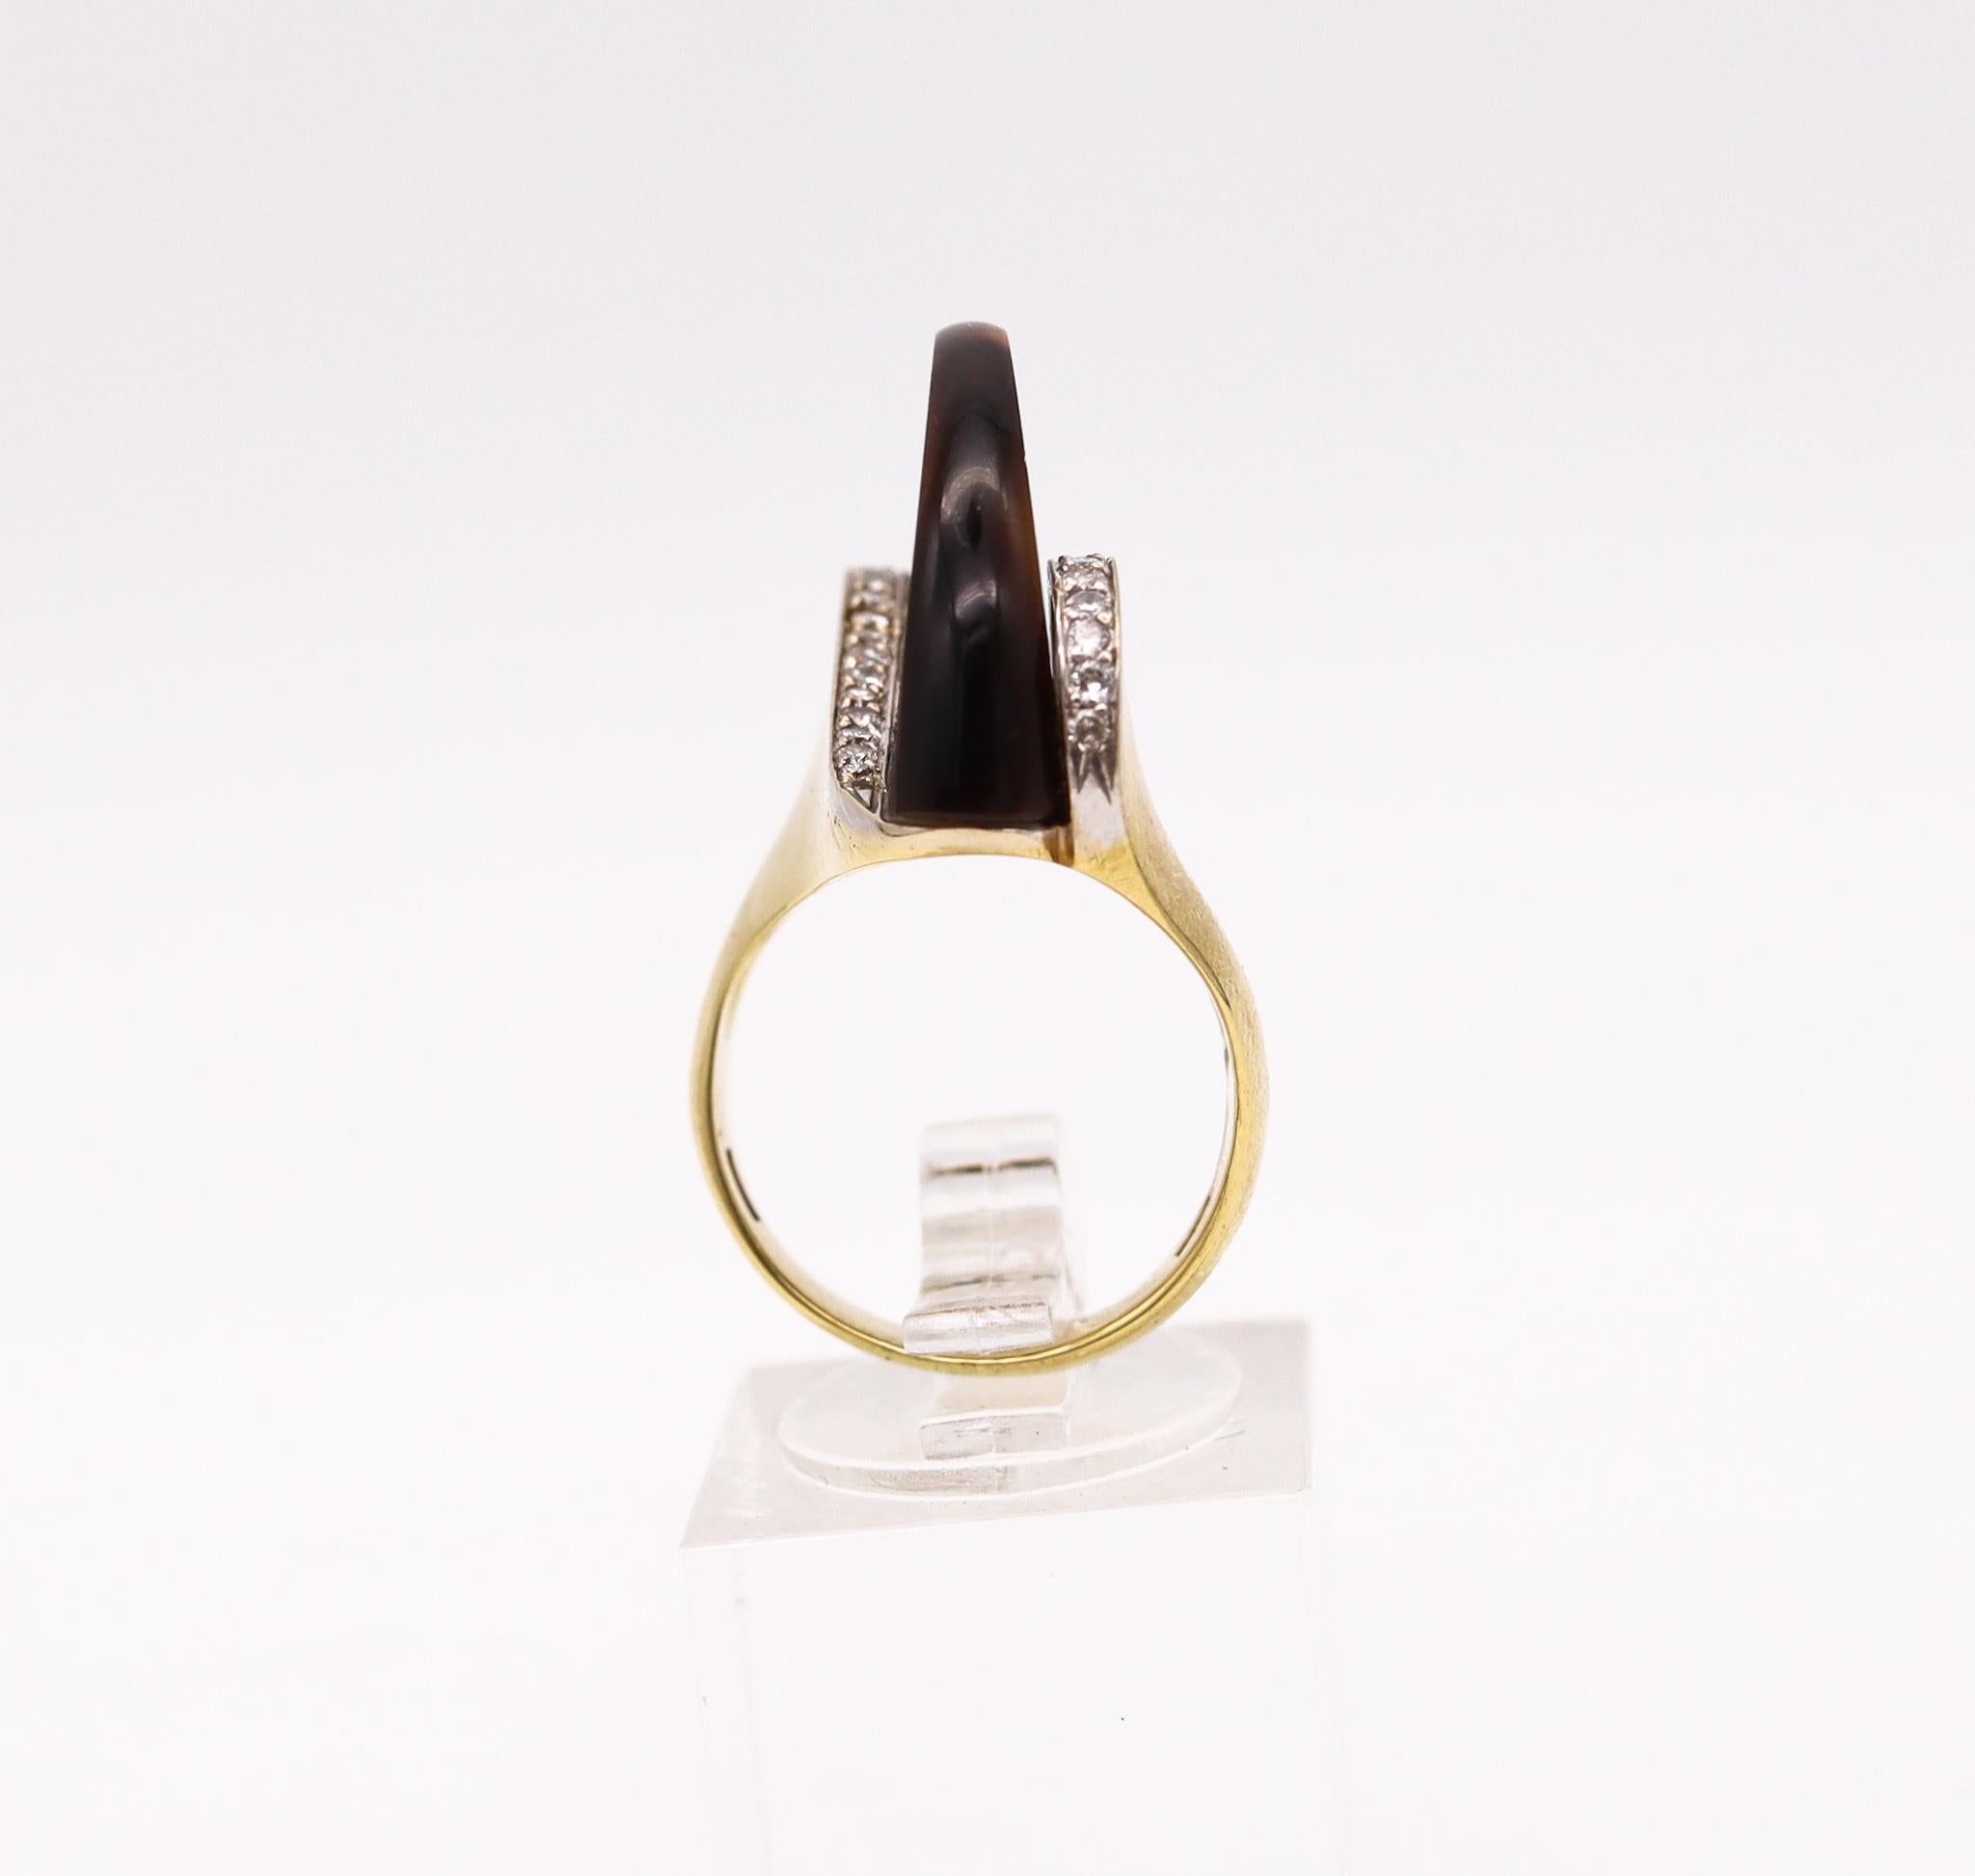 Brilliant Cut Sculptural Retro 1970 Cocktail Ring 18kt Gold with Diamonds and Tiger Eye Quartz